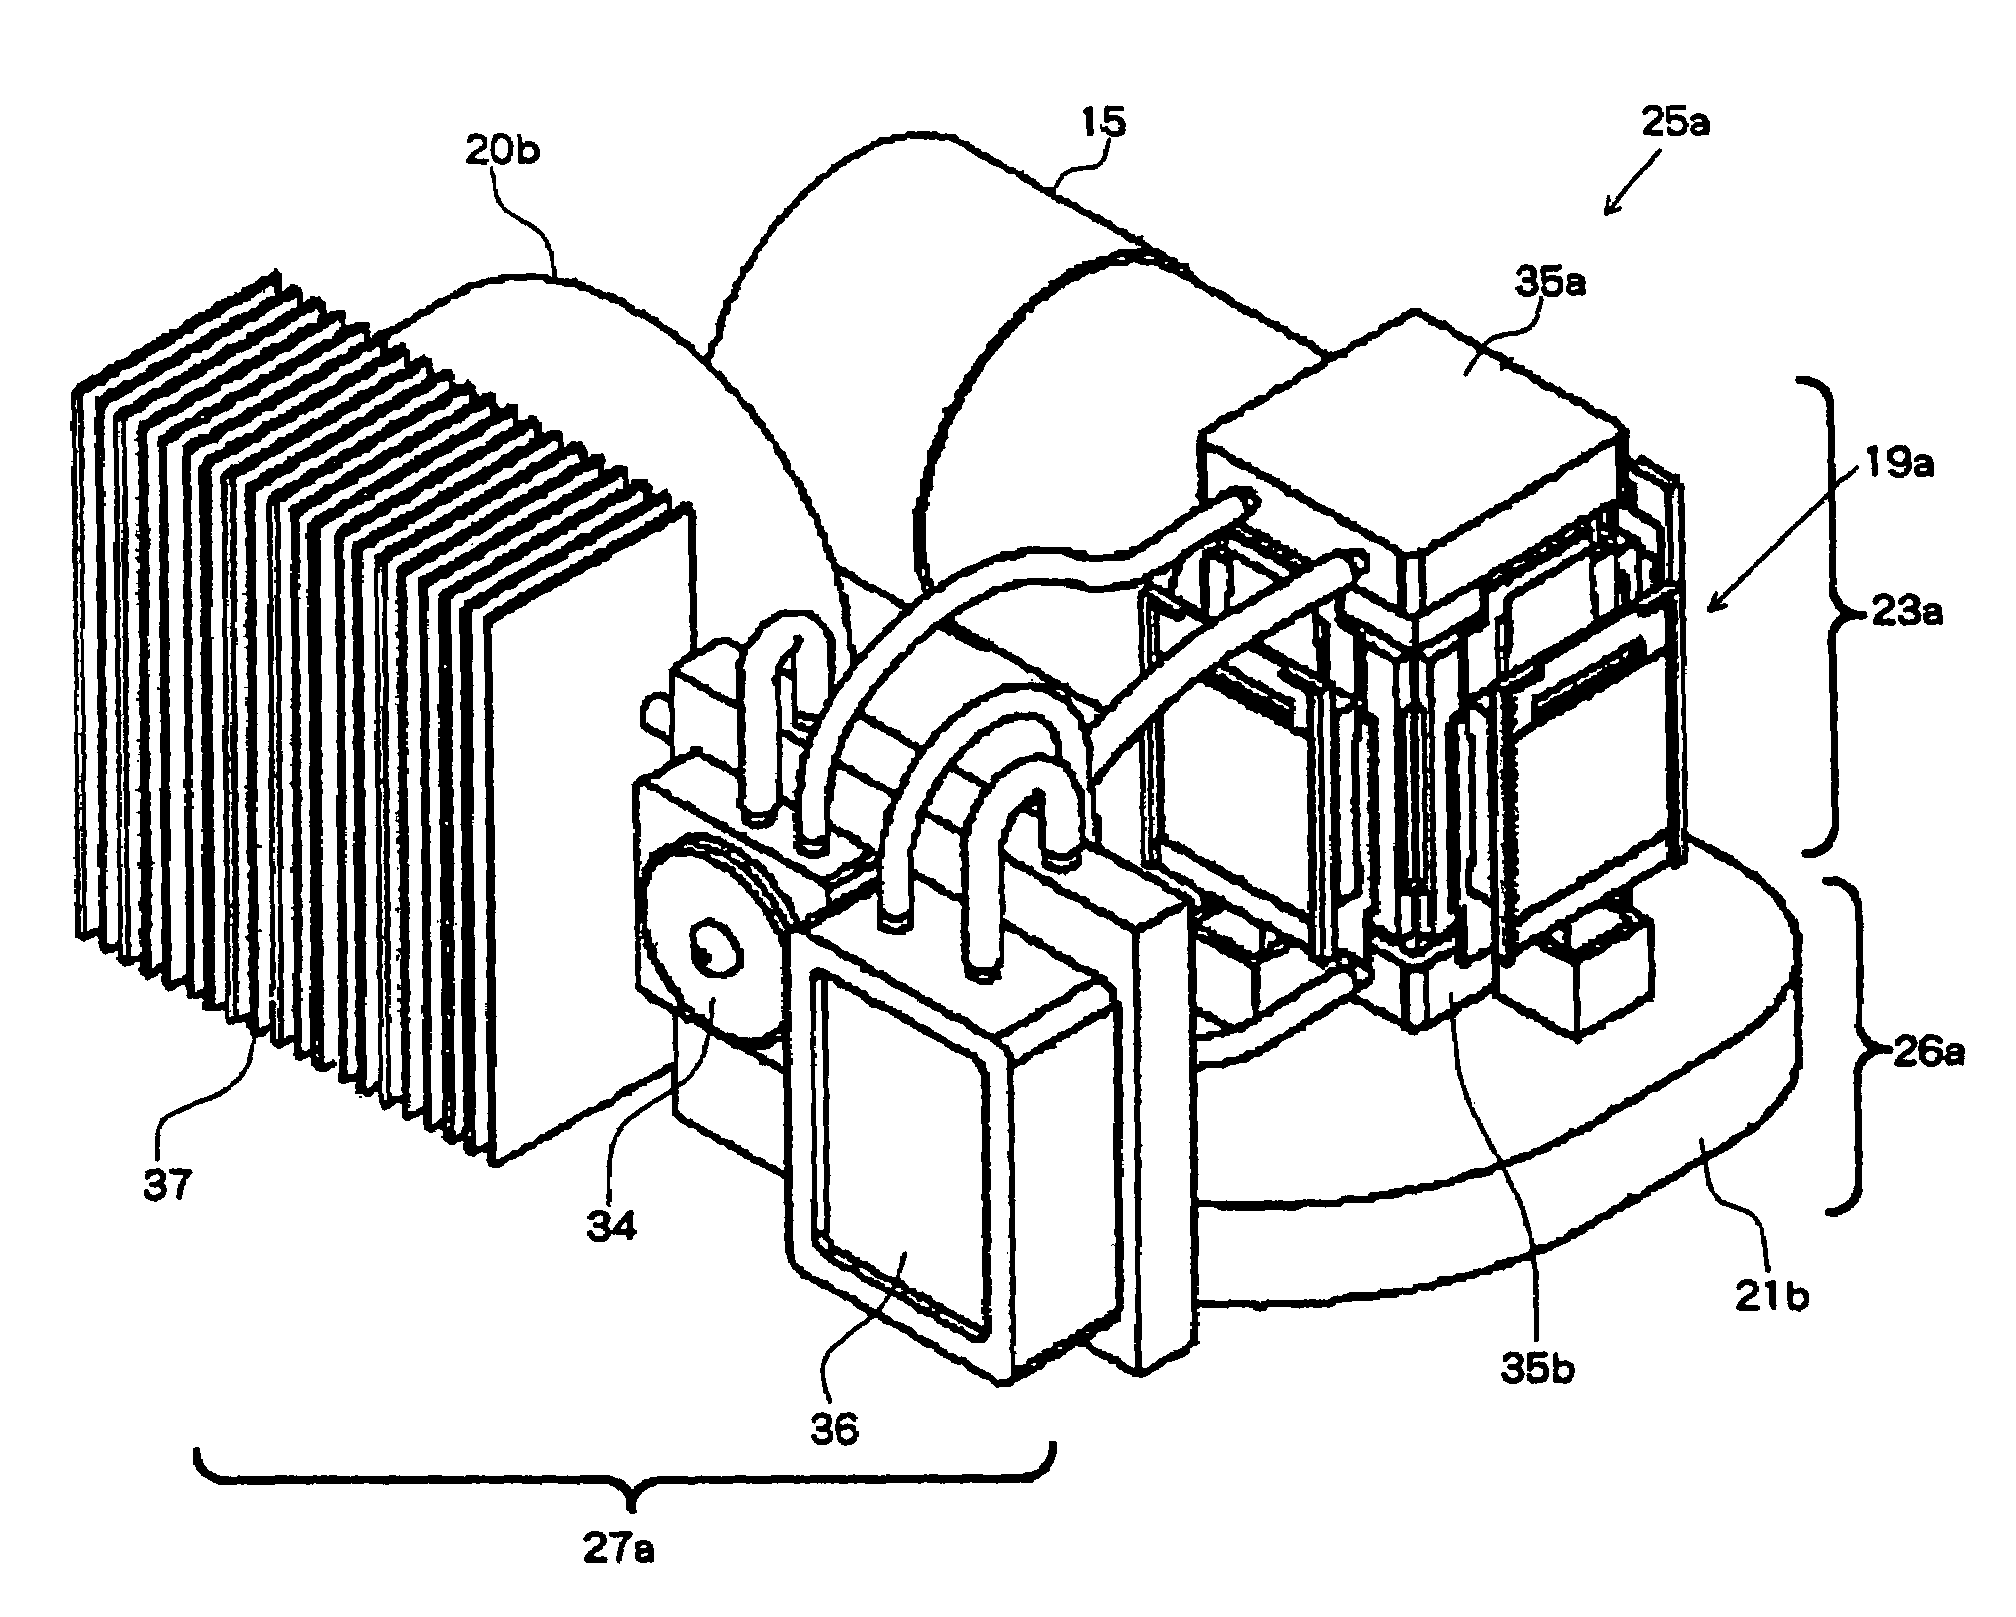 Projection display apparatus using liquid cooling and air cooling